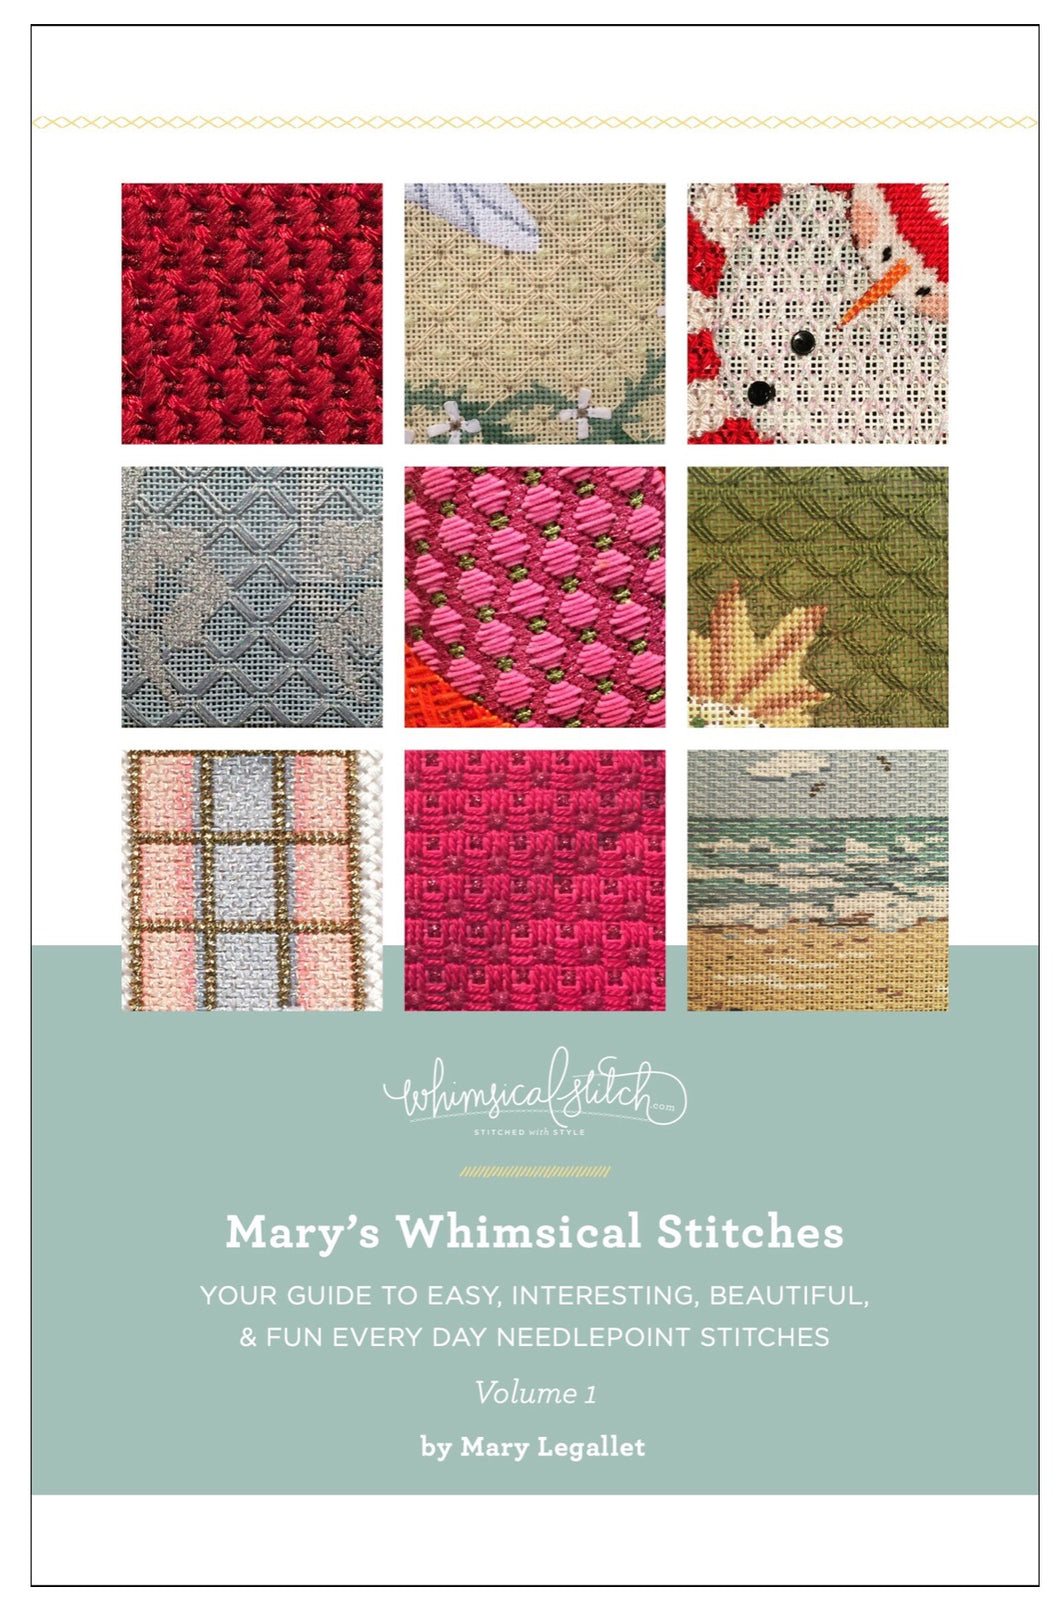 Mary’s Whimsical Stitches